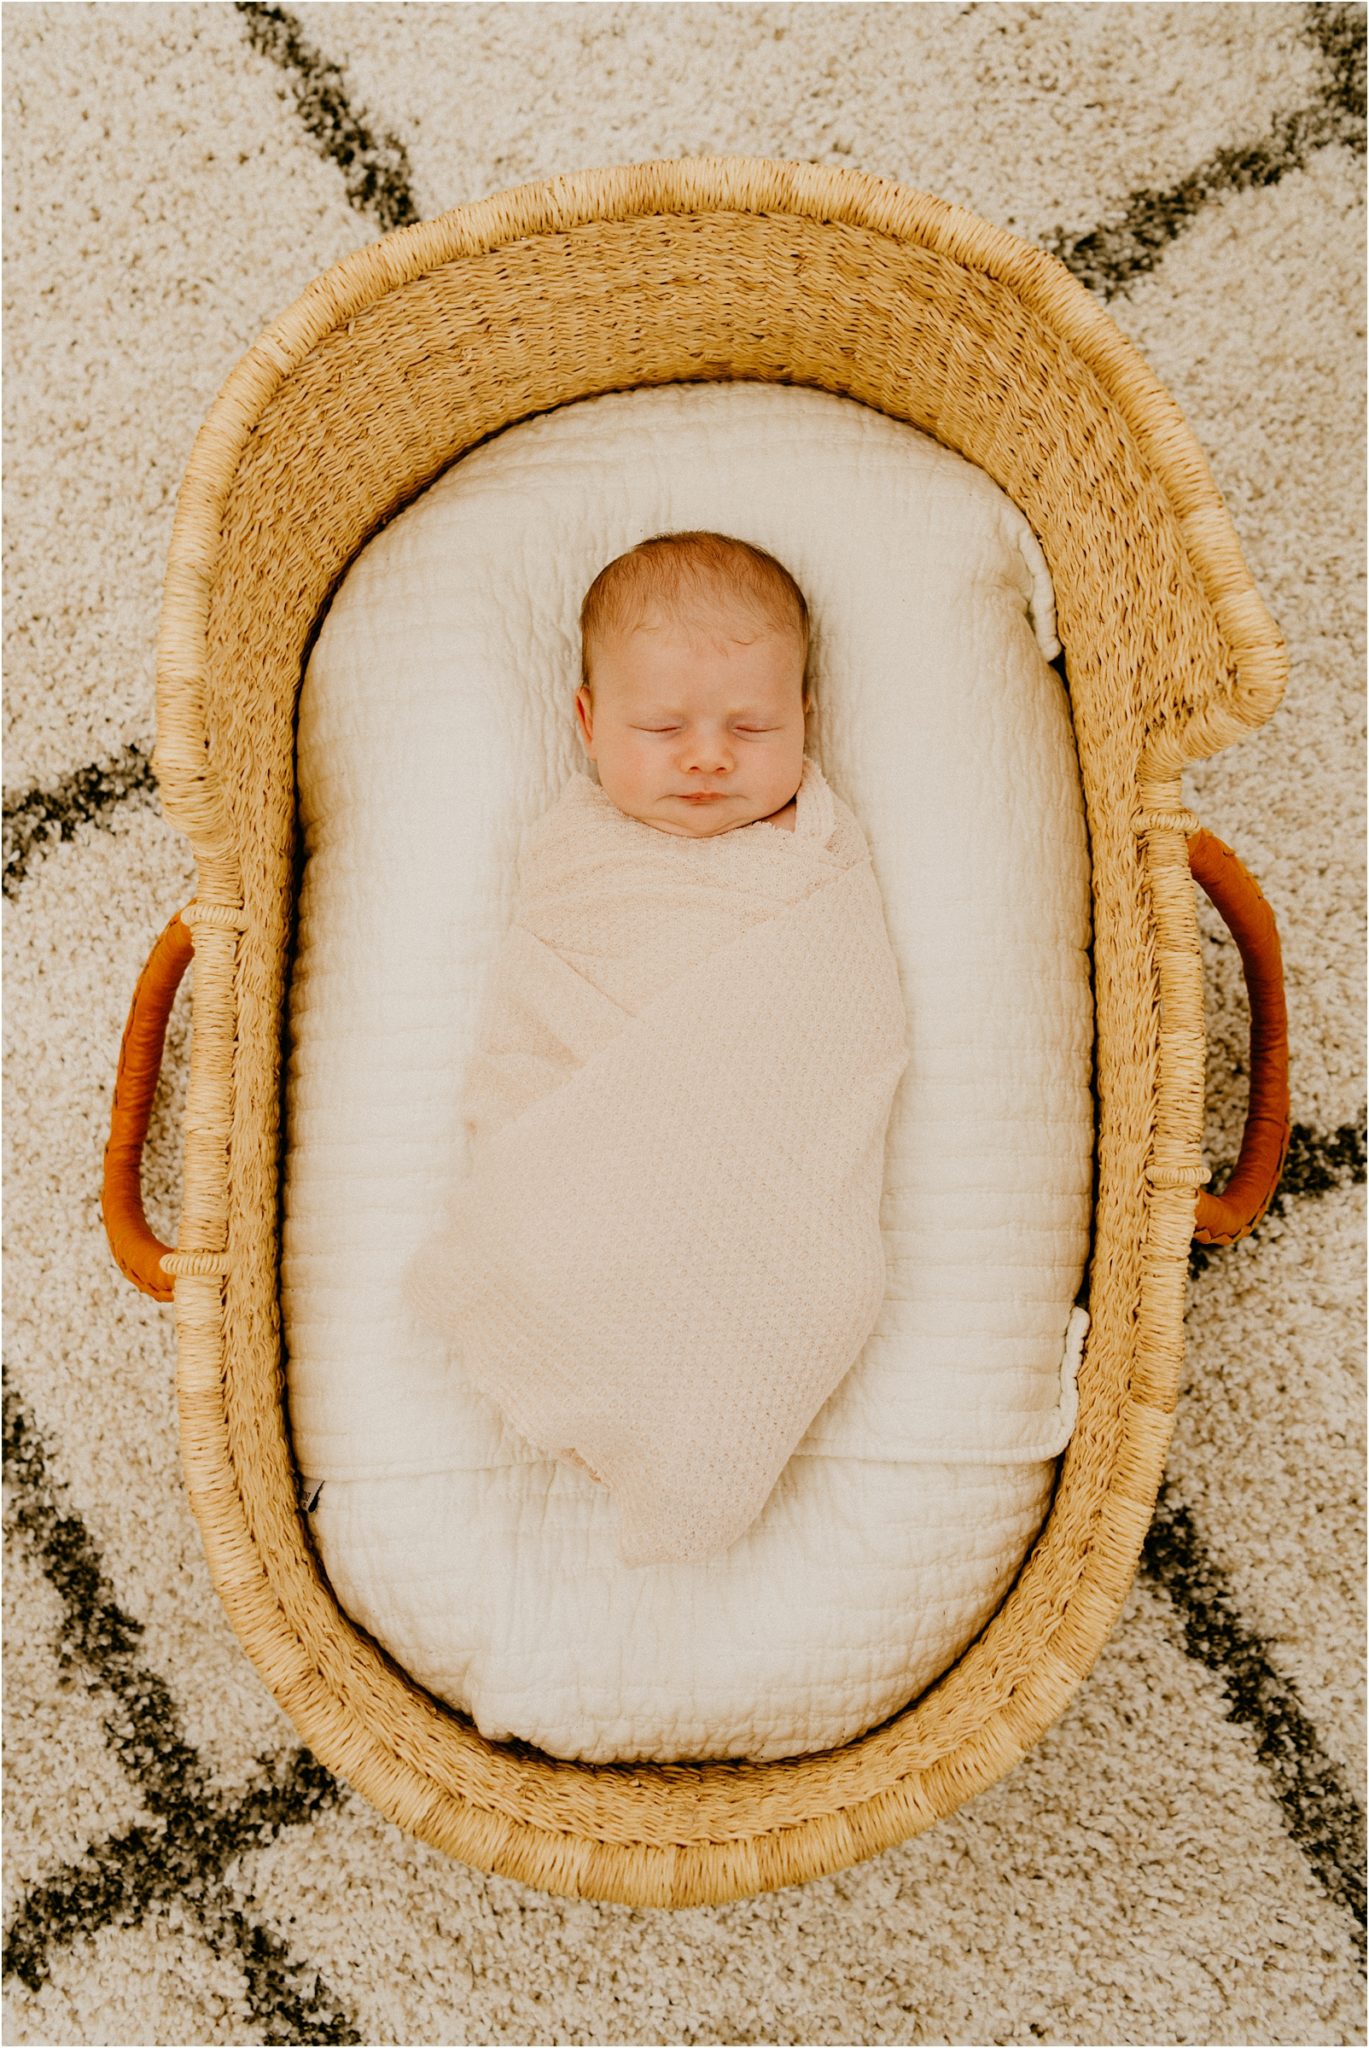  baby in a bassinet 